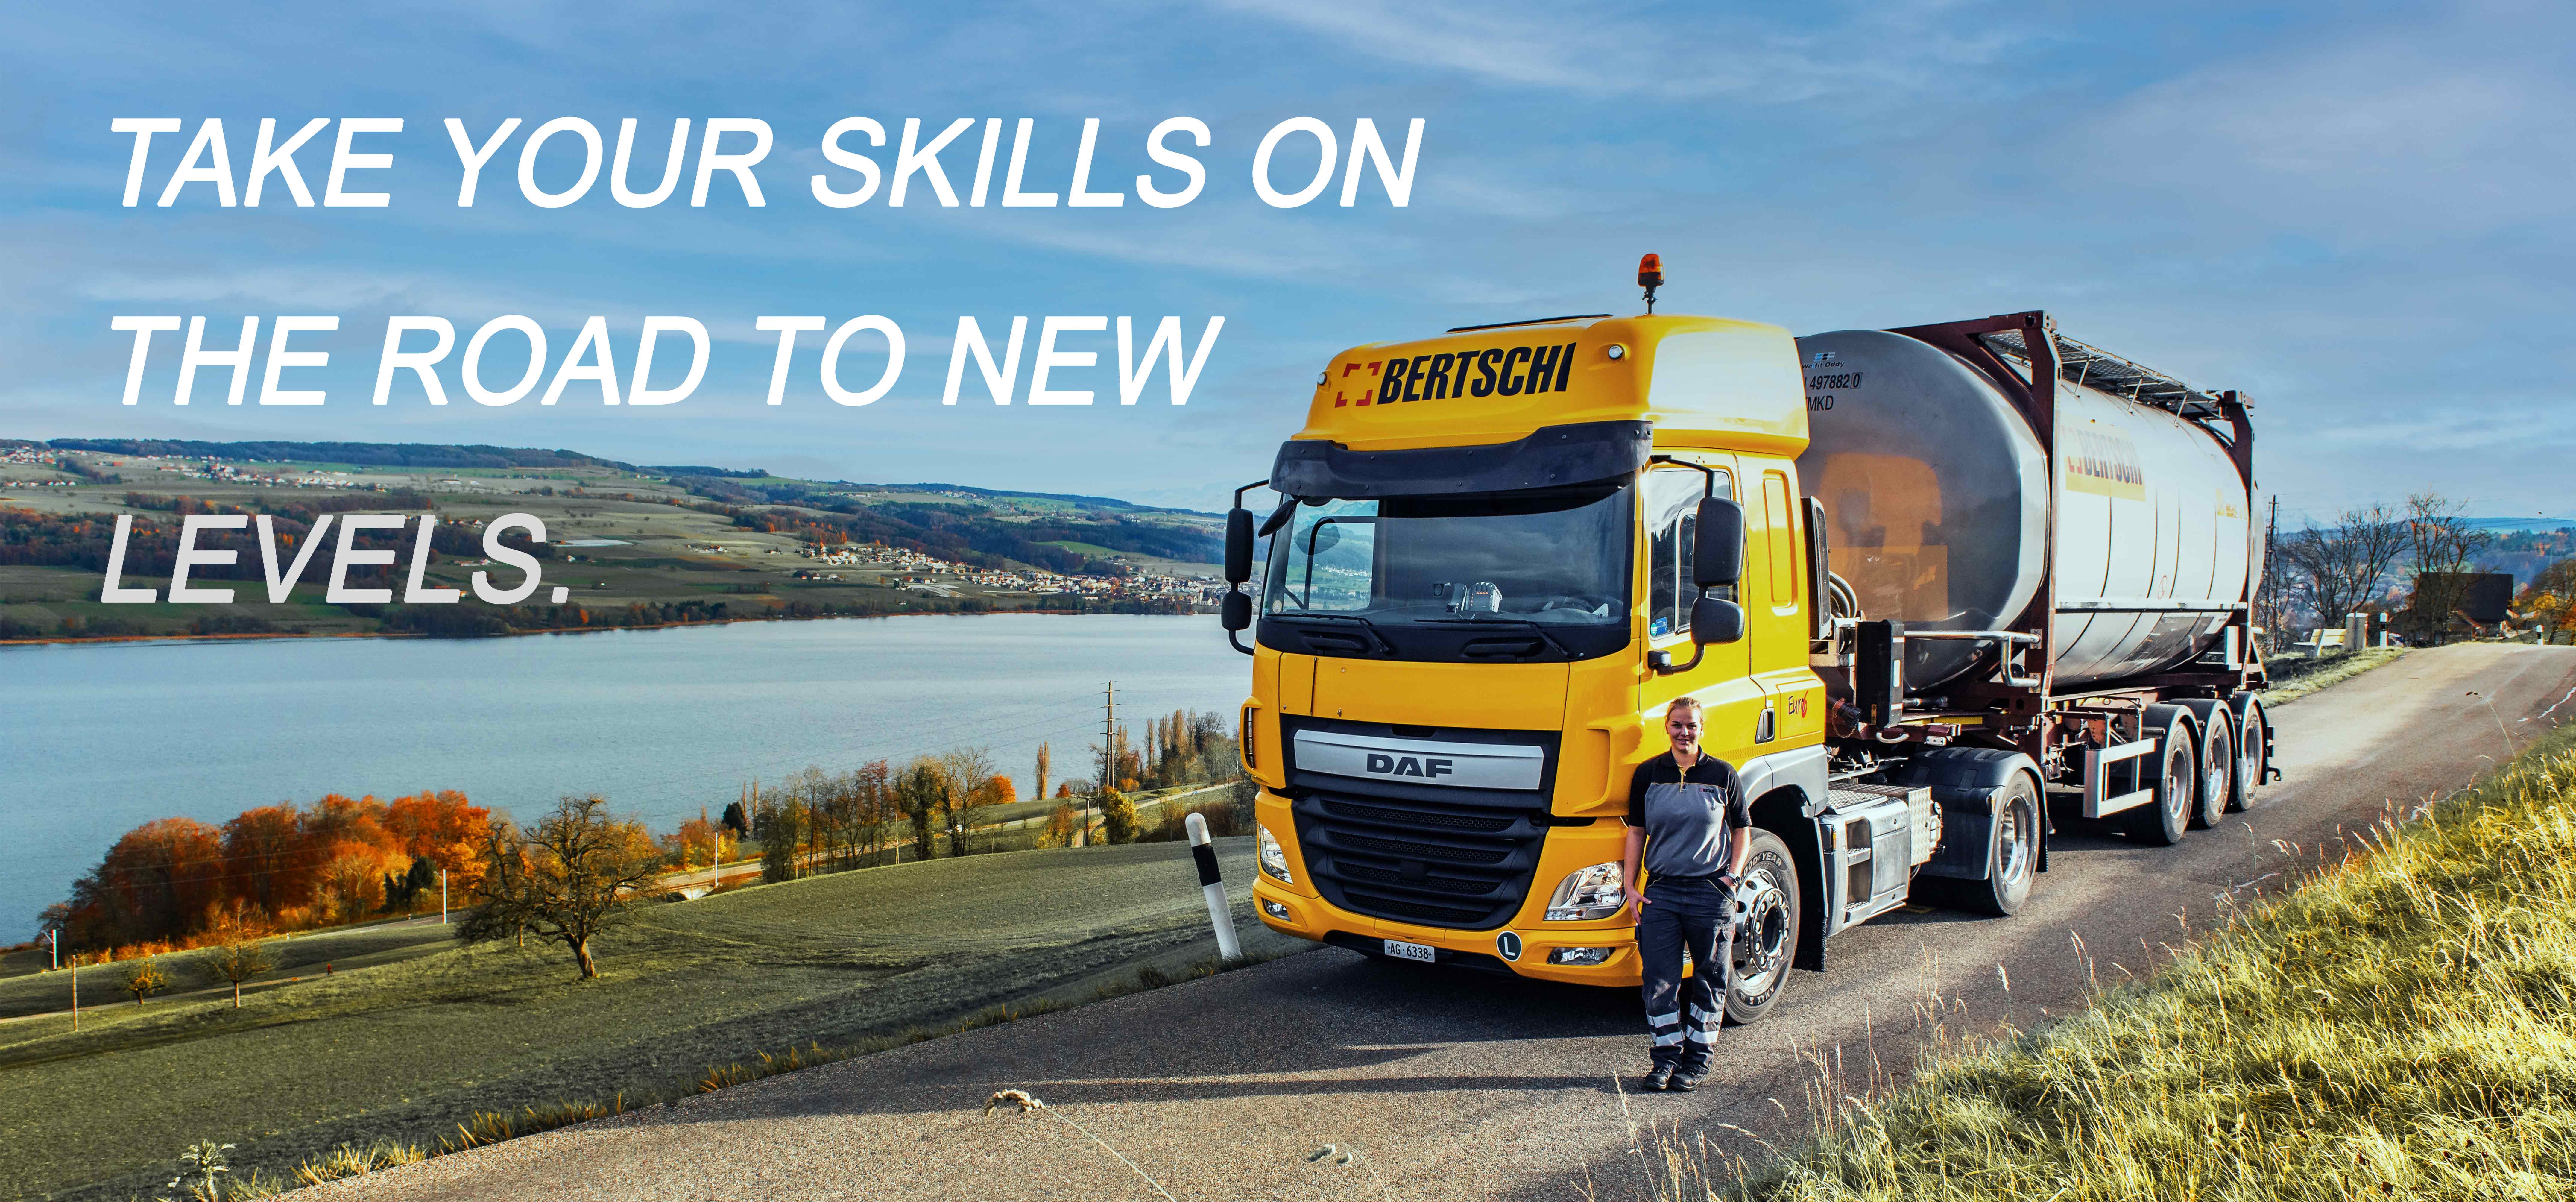 Cover photo of truck on landscape, with text: "Take your skills on the road to new levels."